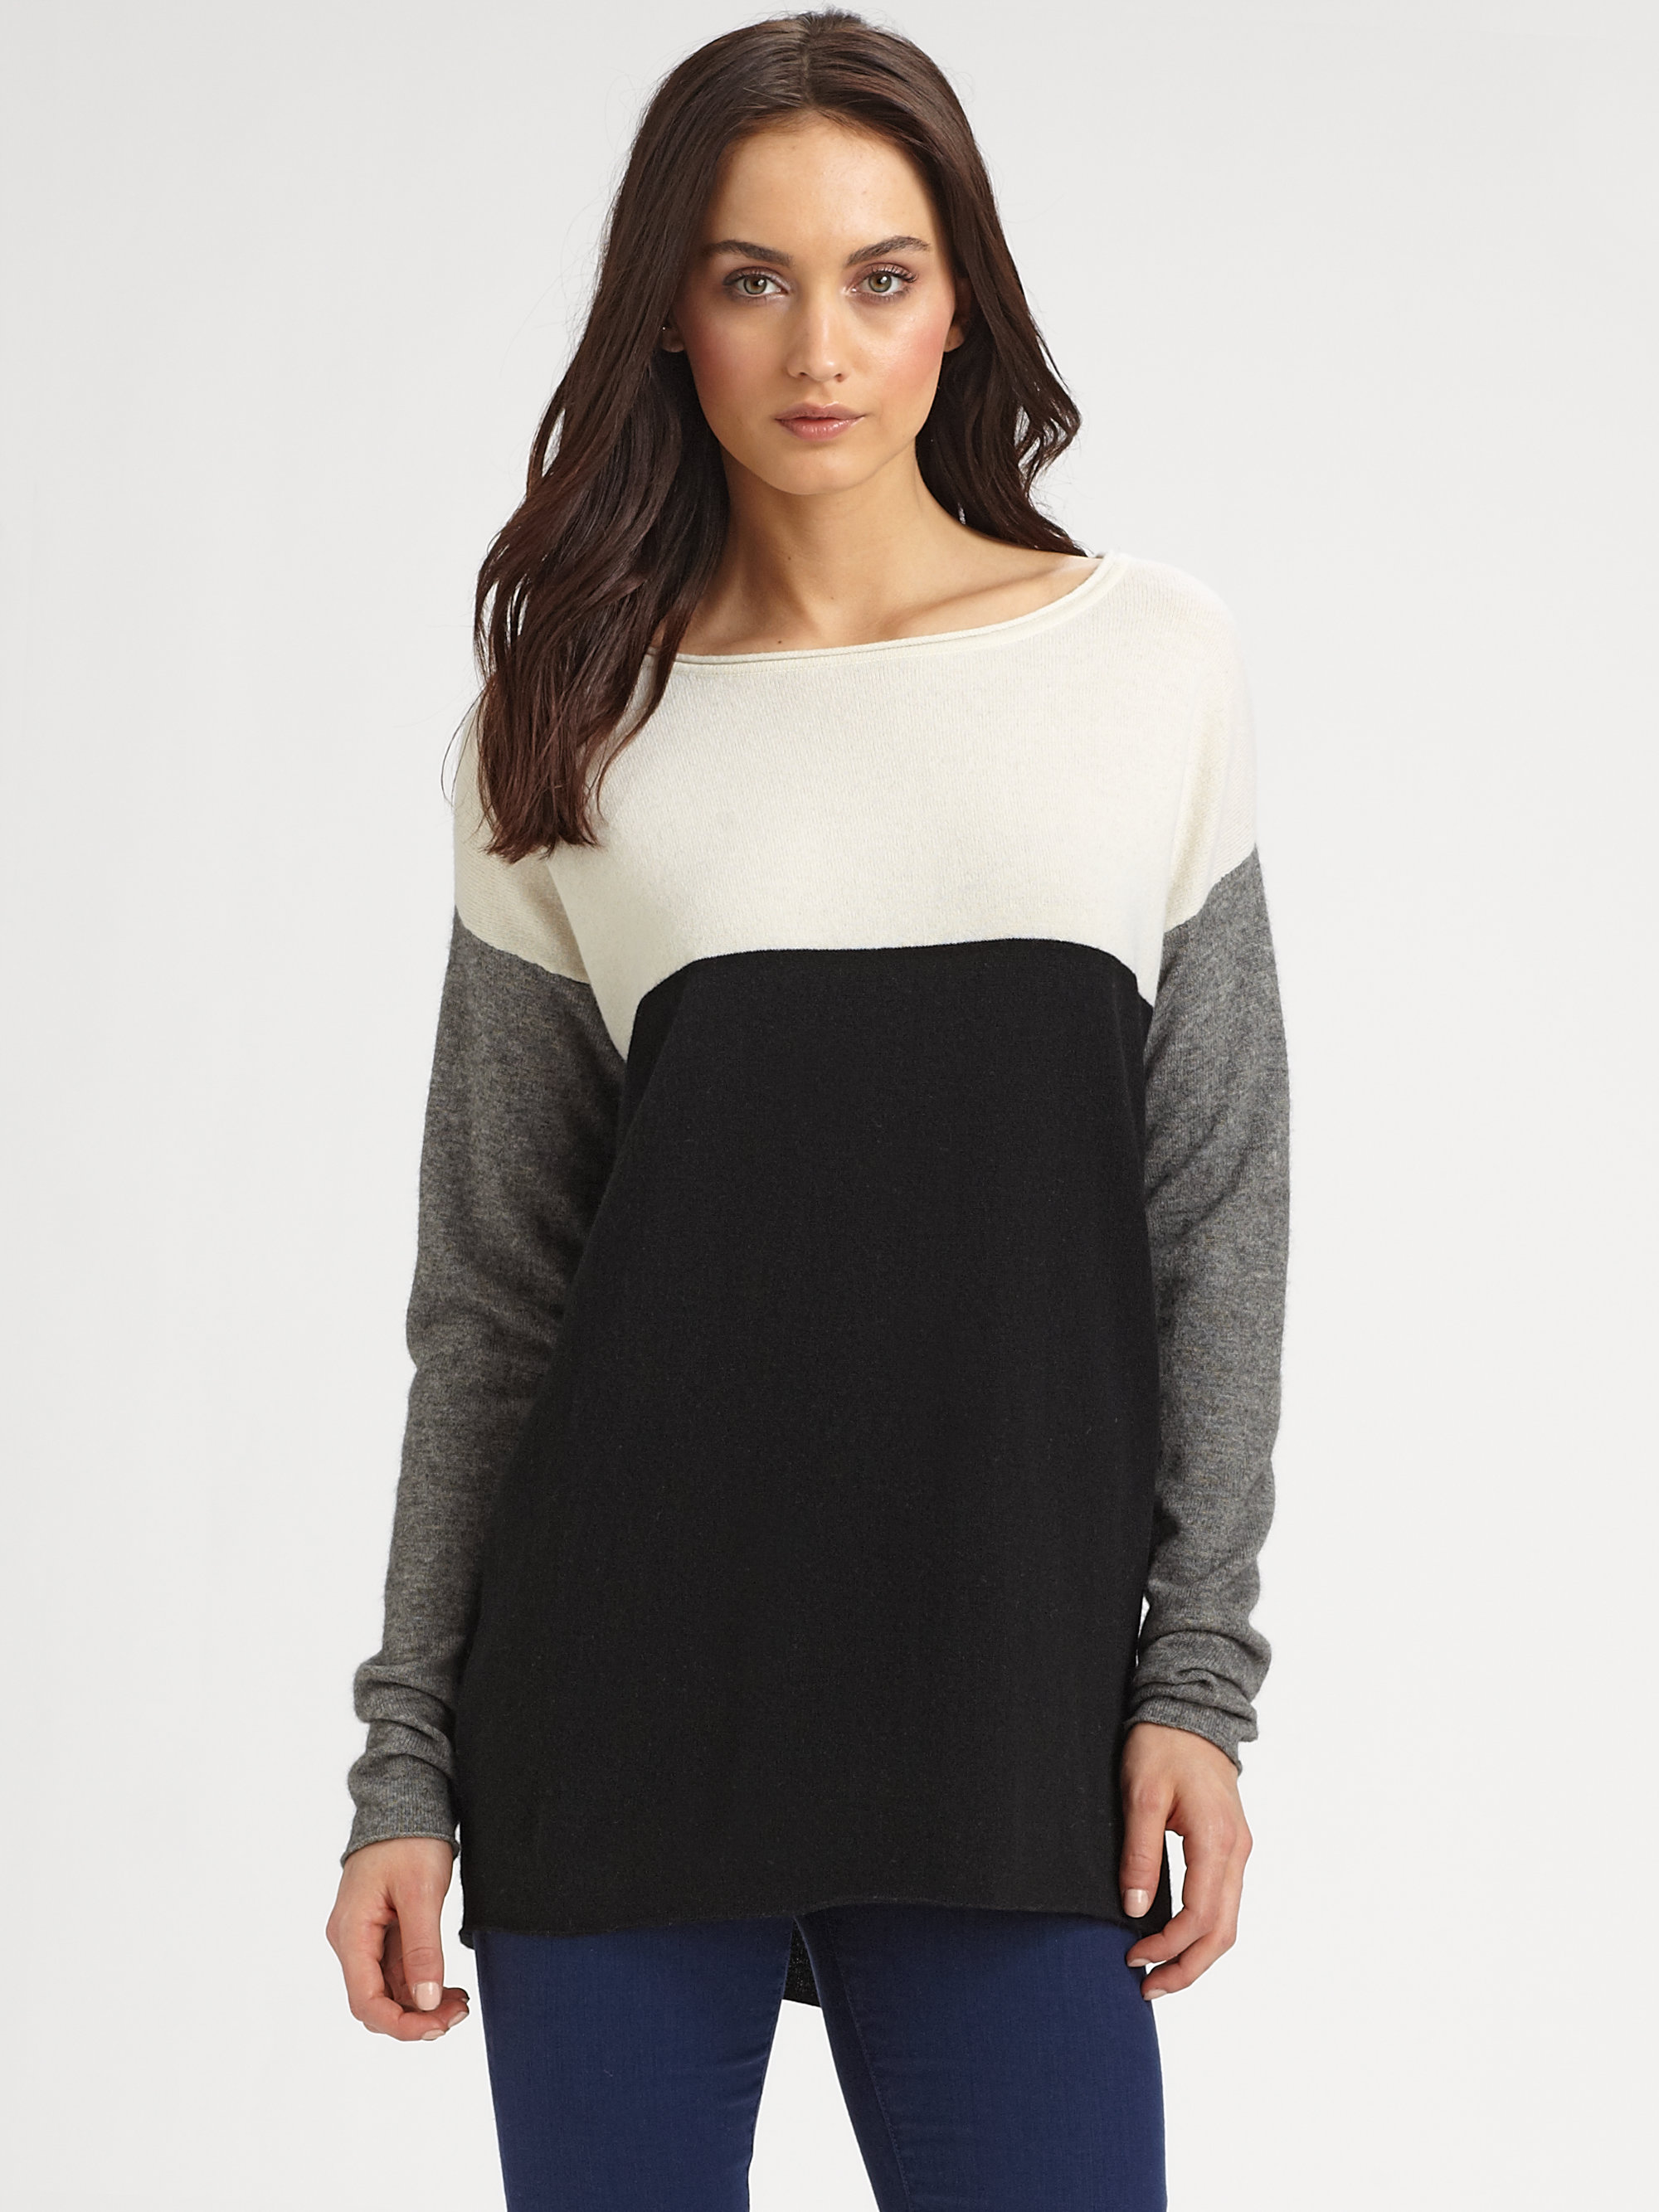 Lyst - Vince Wool And Cashmere Colorblock Sweater in Black